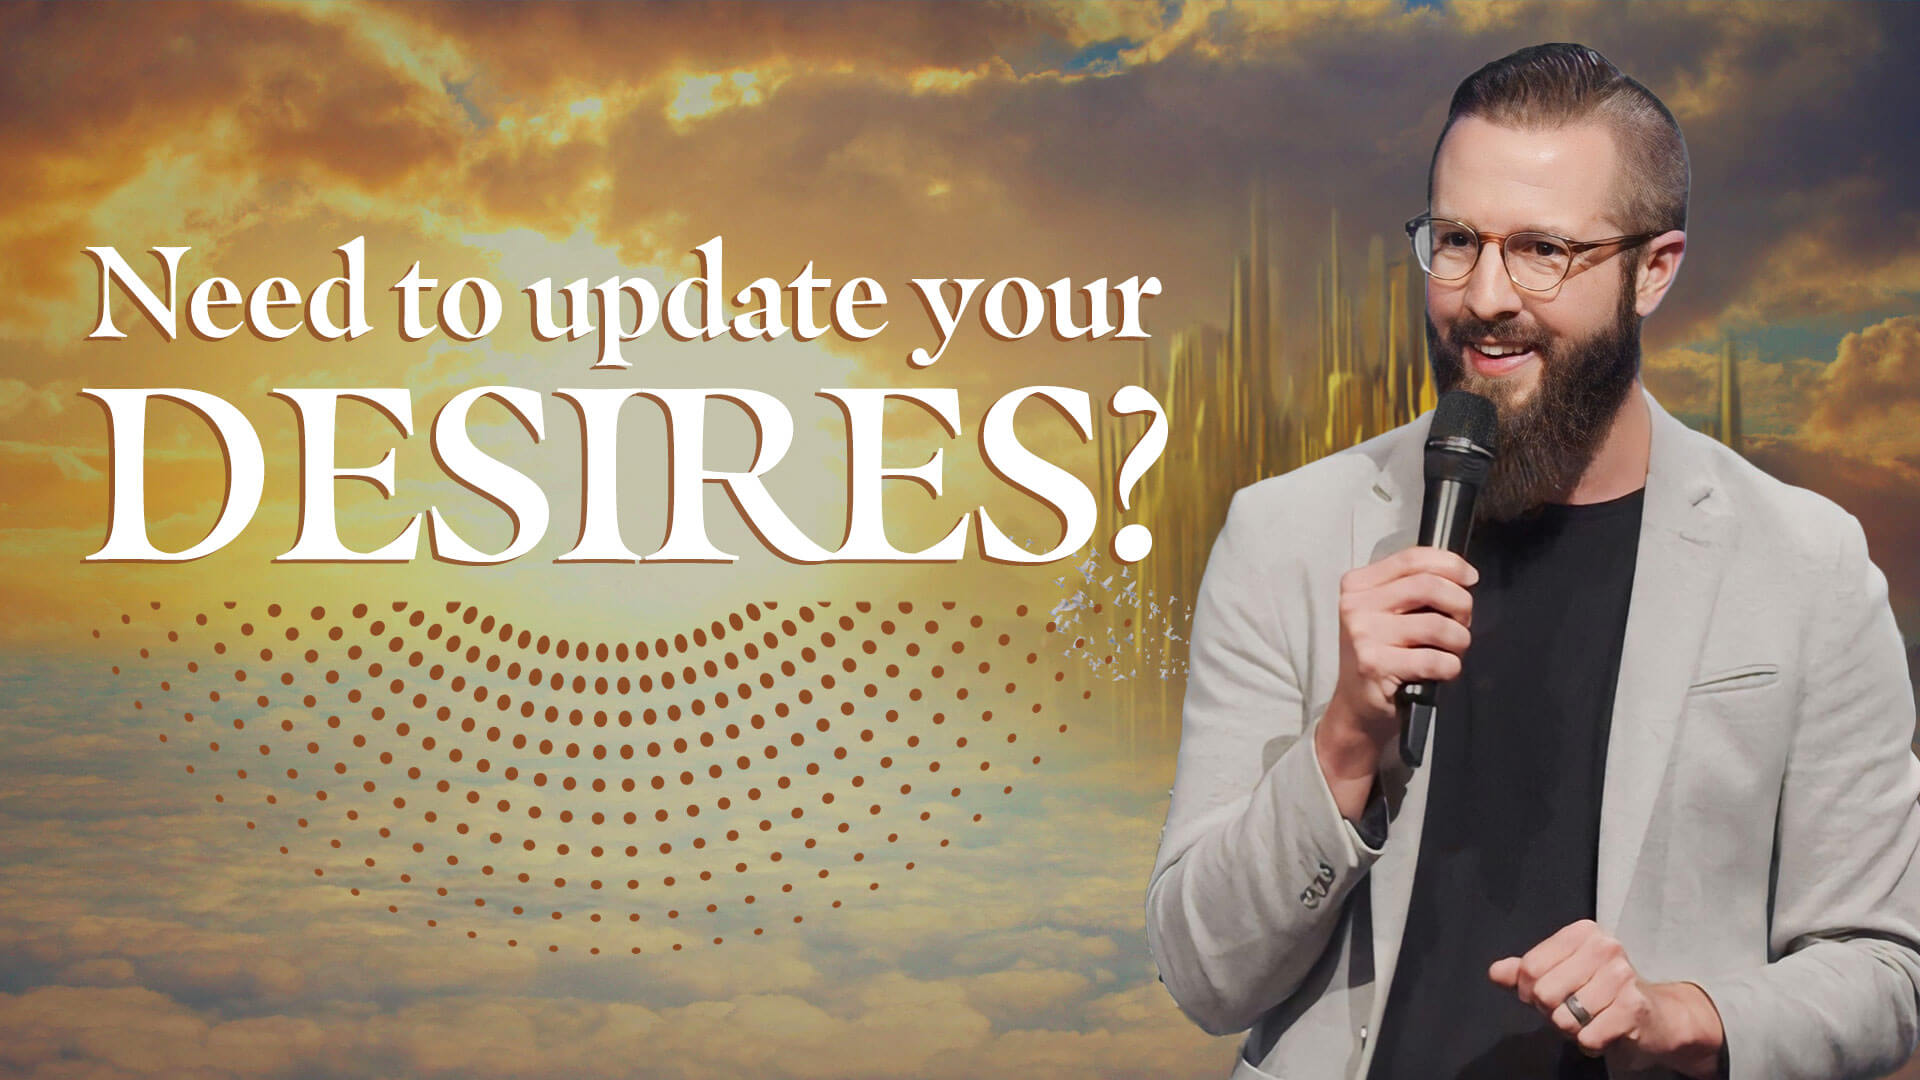 Need God to update your desires?